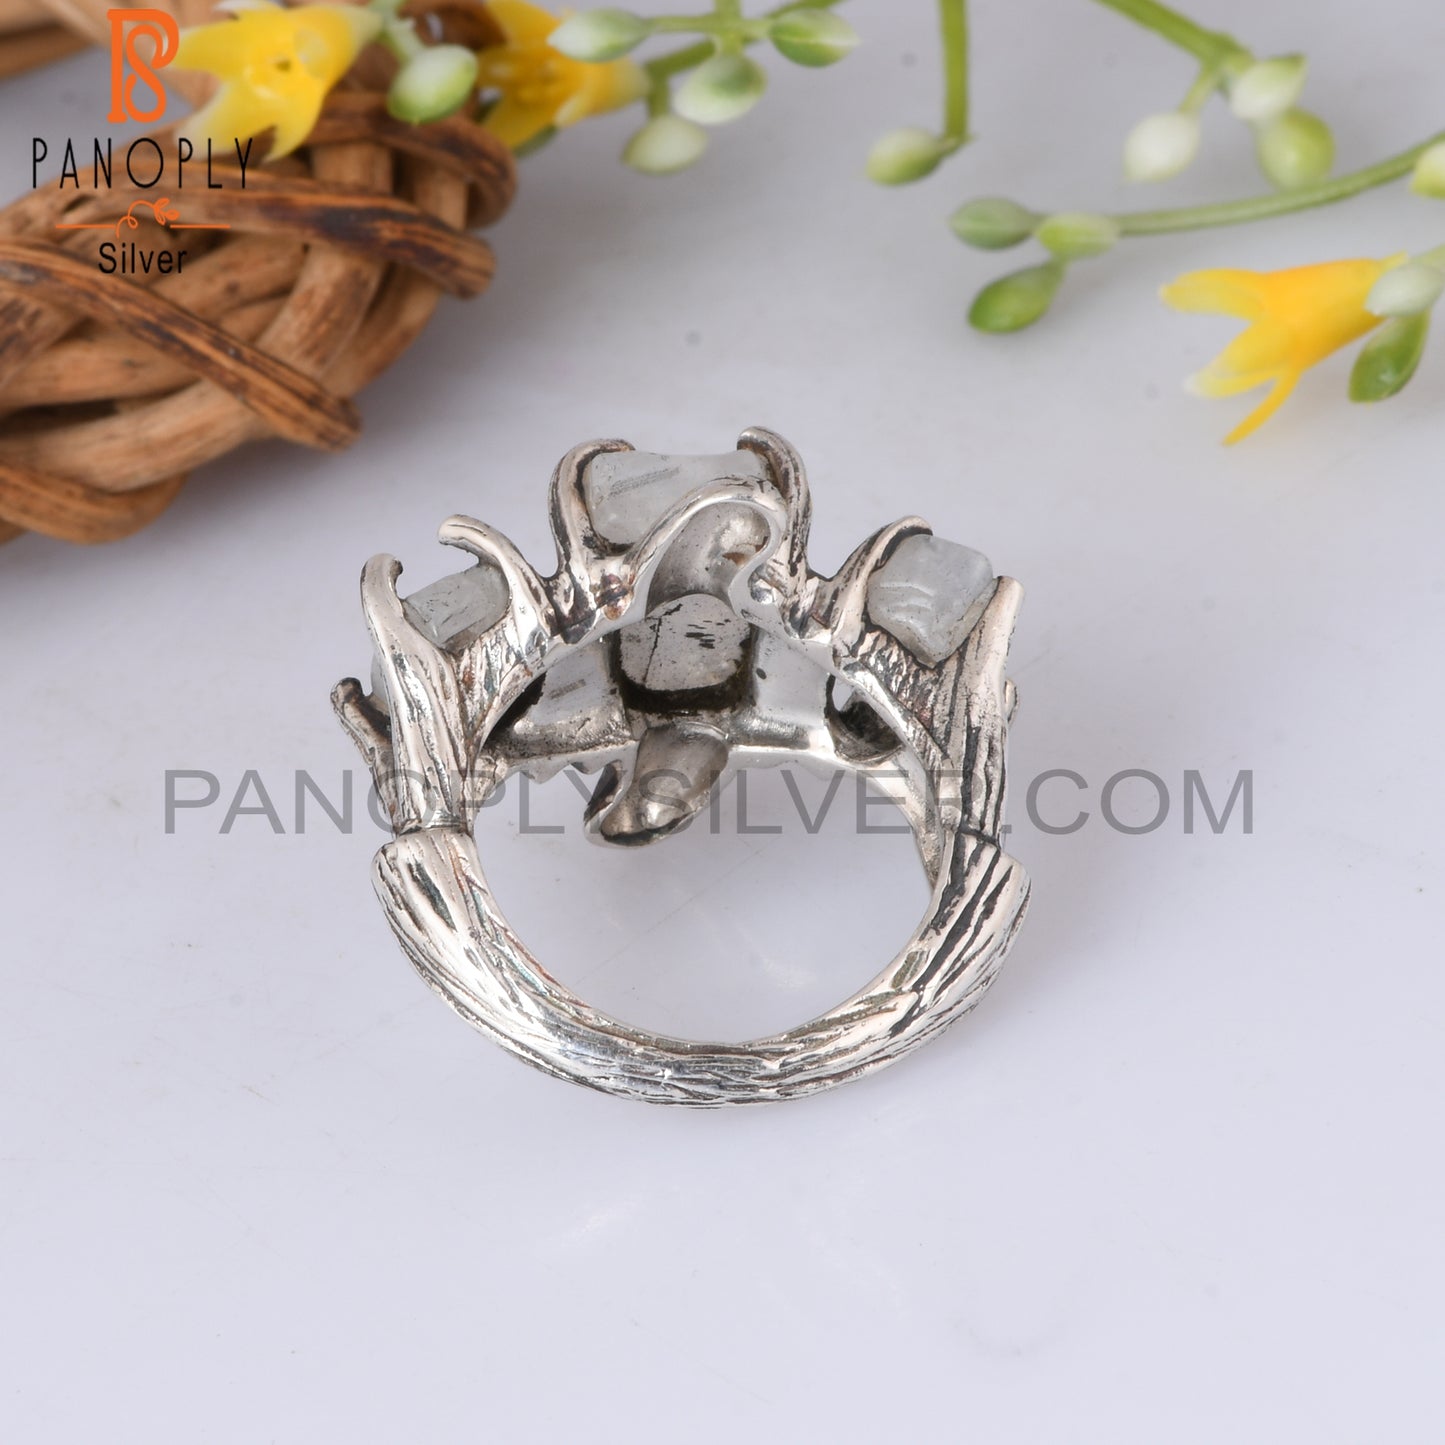 Rainbow Moonstone 925 Sterling Silver Branch 3 Stone Ring